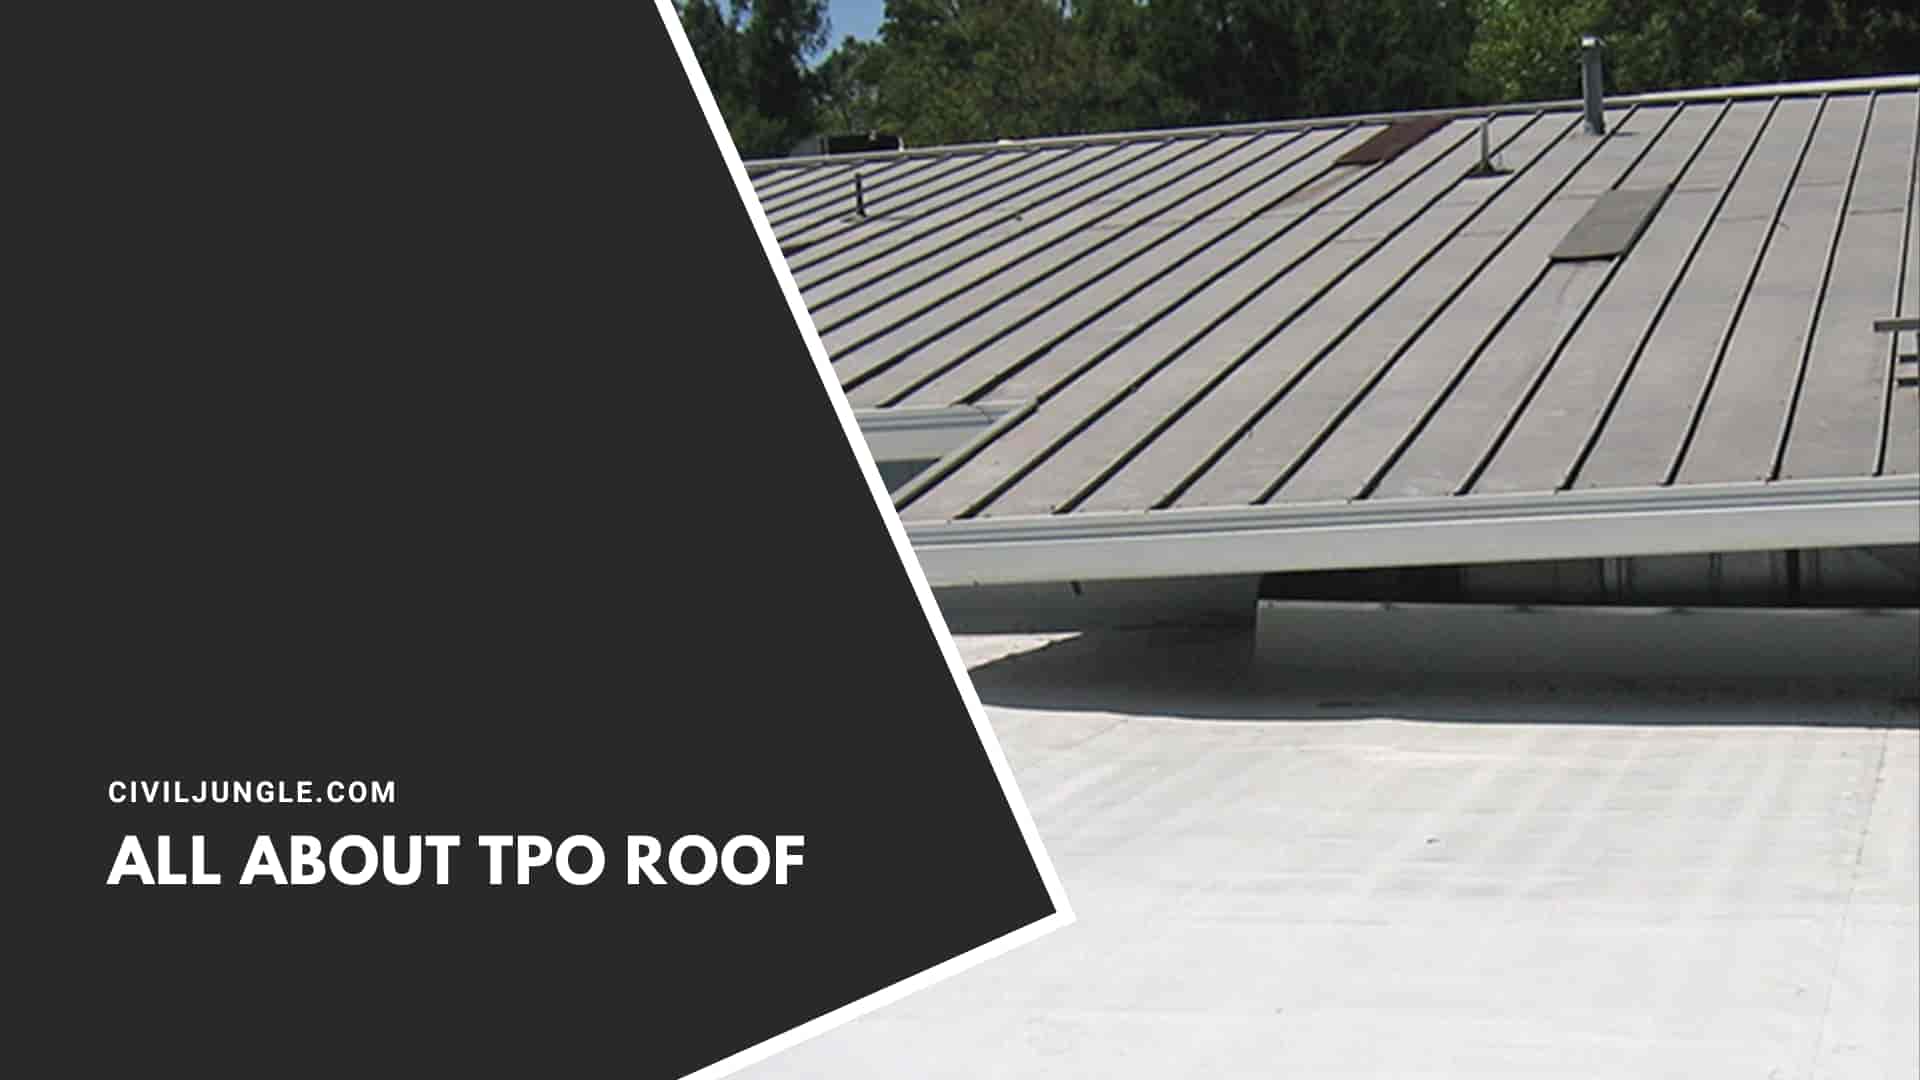 All About TPO Roof